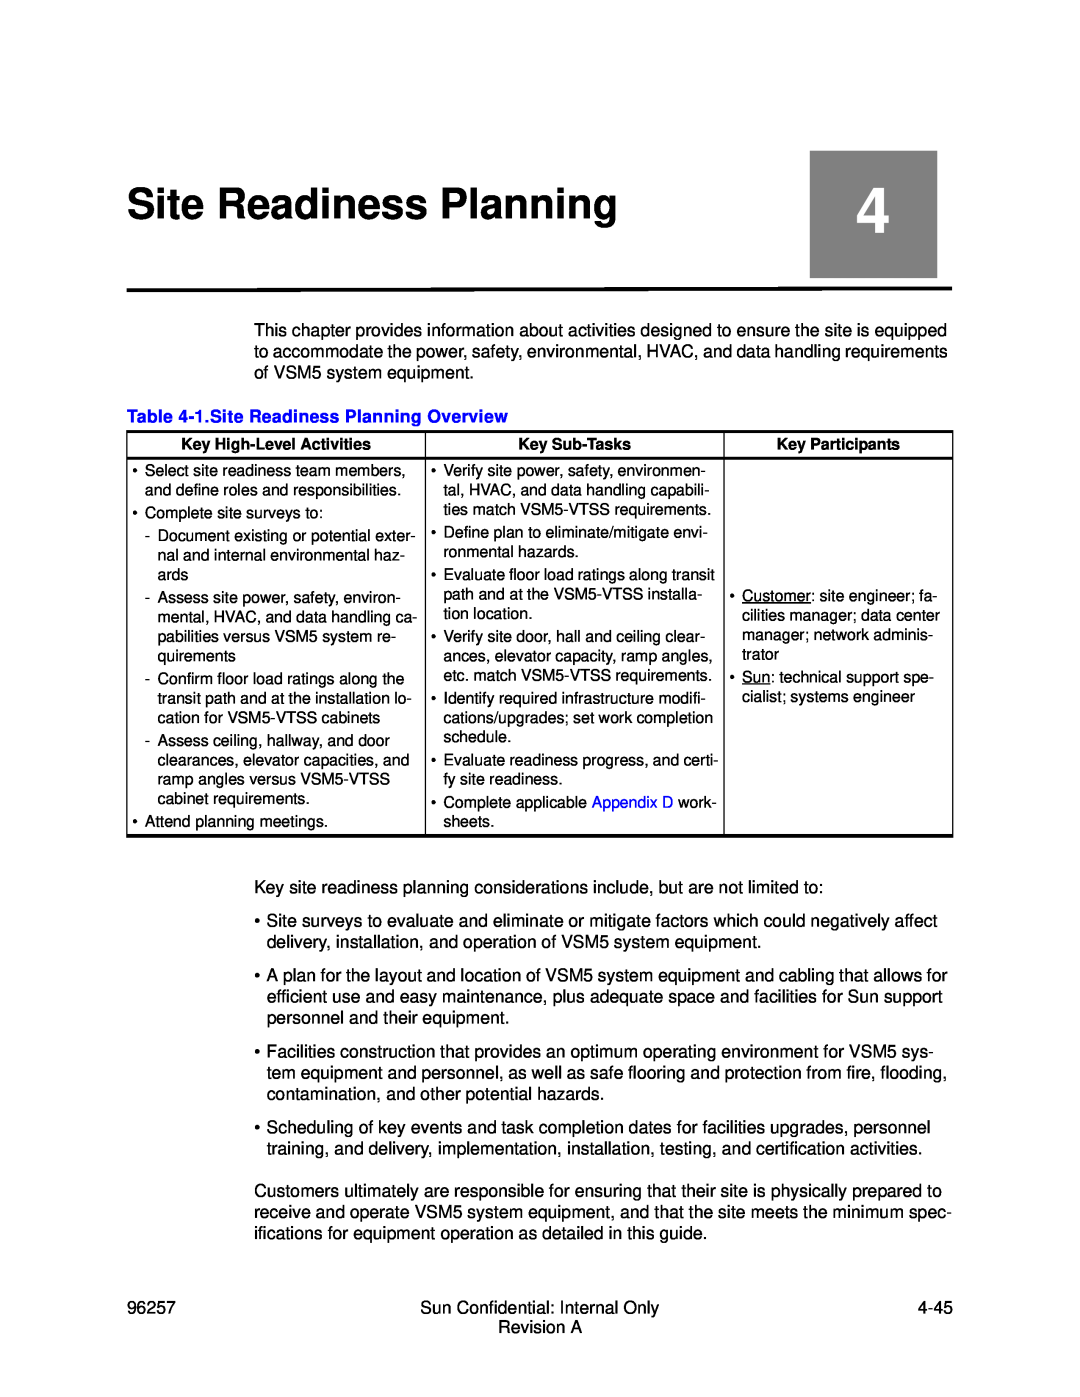 Sun Microsystems 96257 manual 1.Site Readiness Planning Overview 